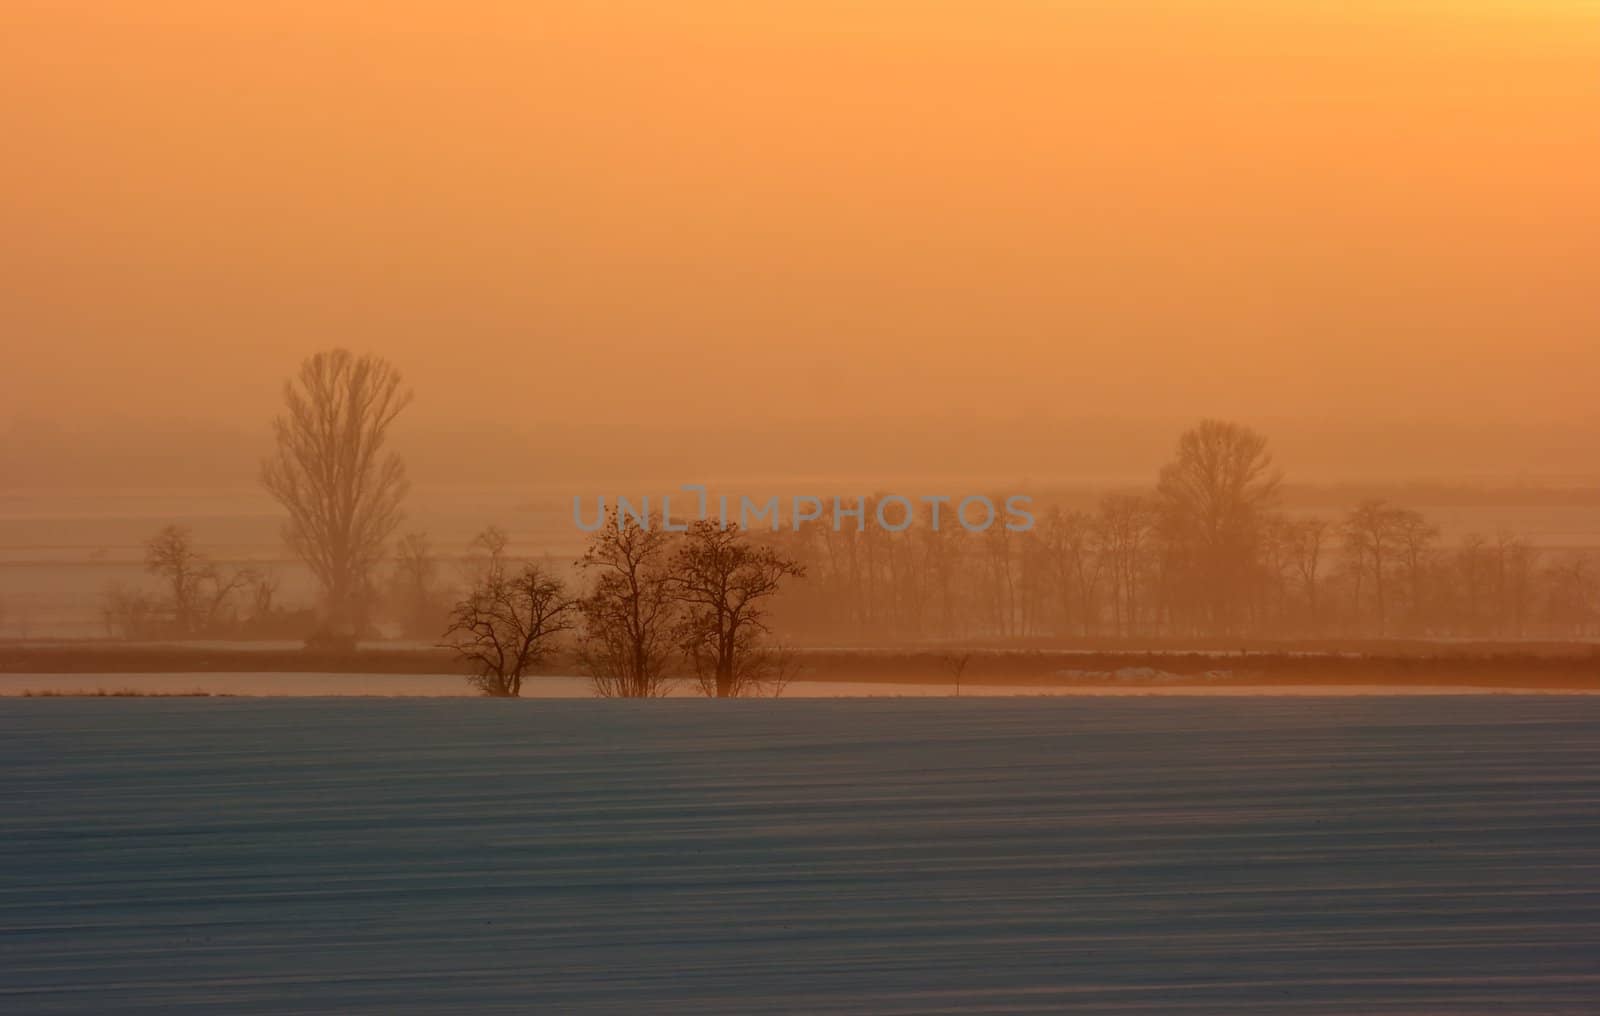 Snowy field landscape with the glowing sky of the sunset